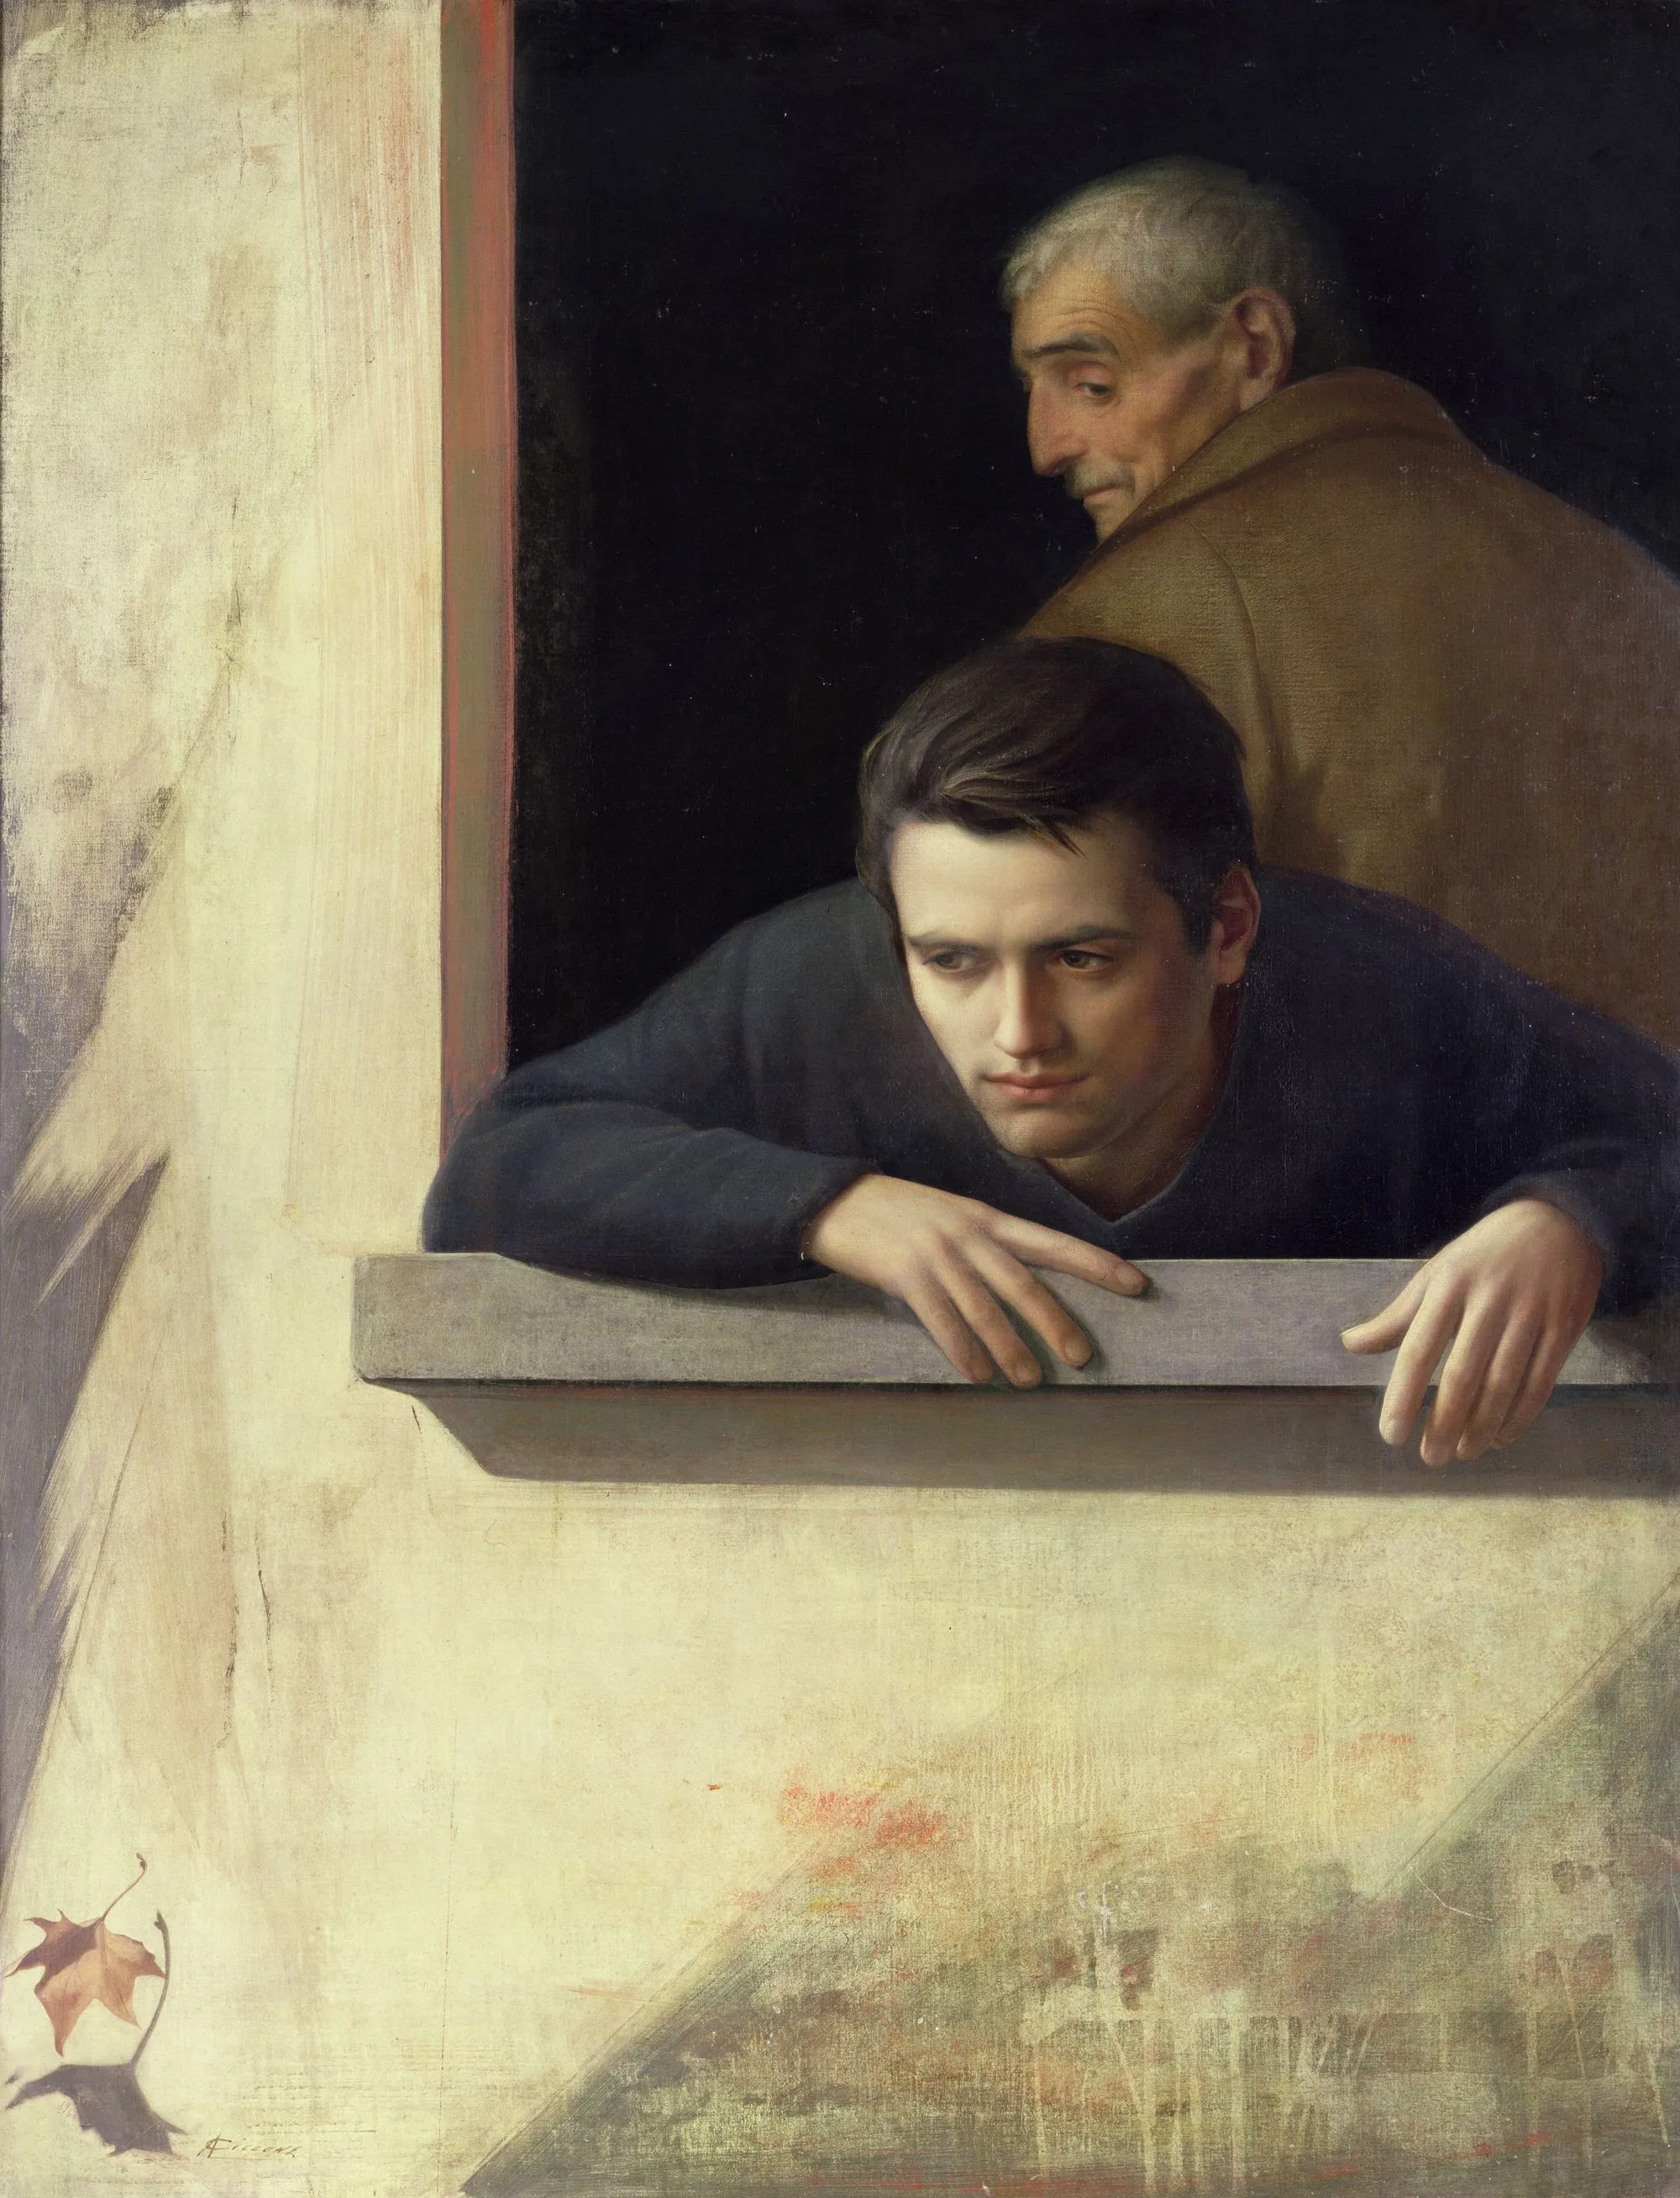 Antonio Ciccone, Les deux âges, 1960, tempera grasse, The Forbes Magazine Collection.